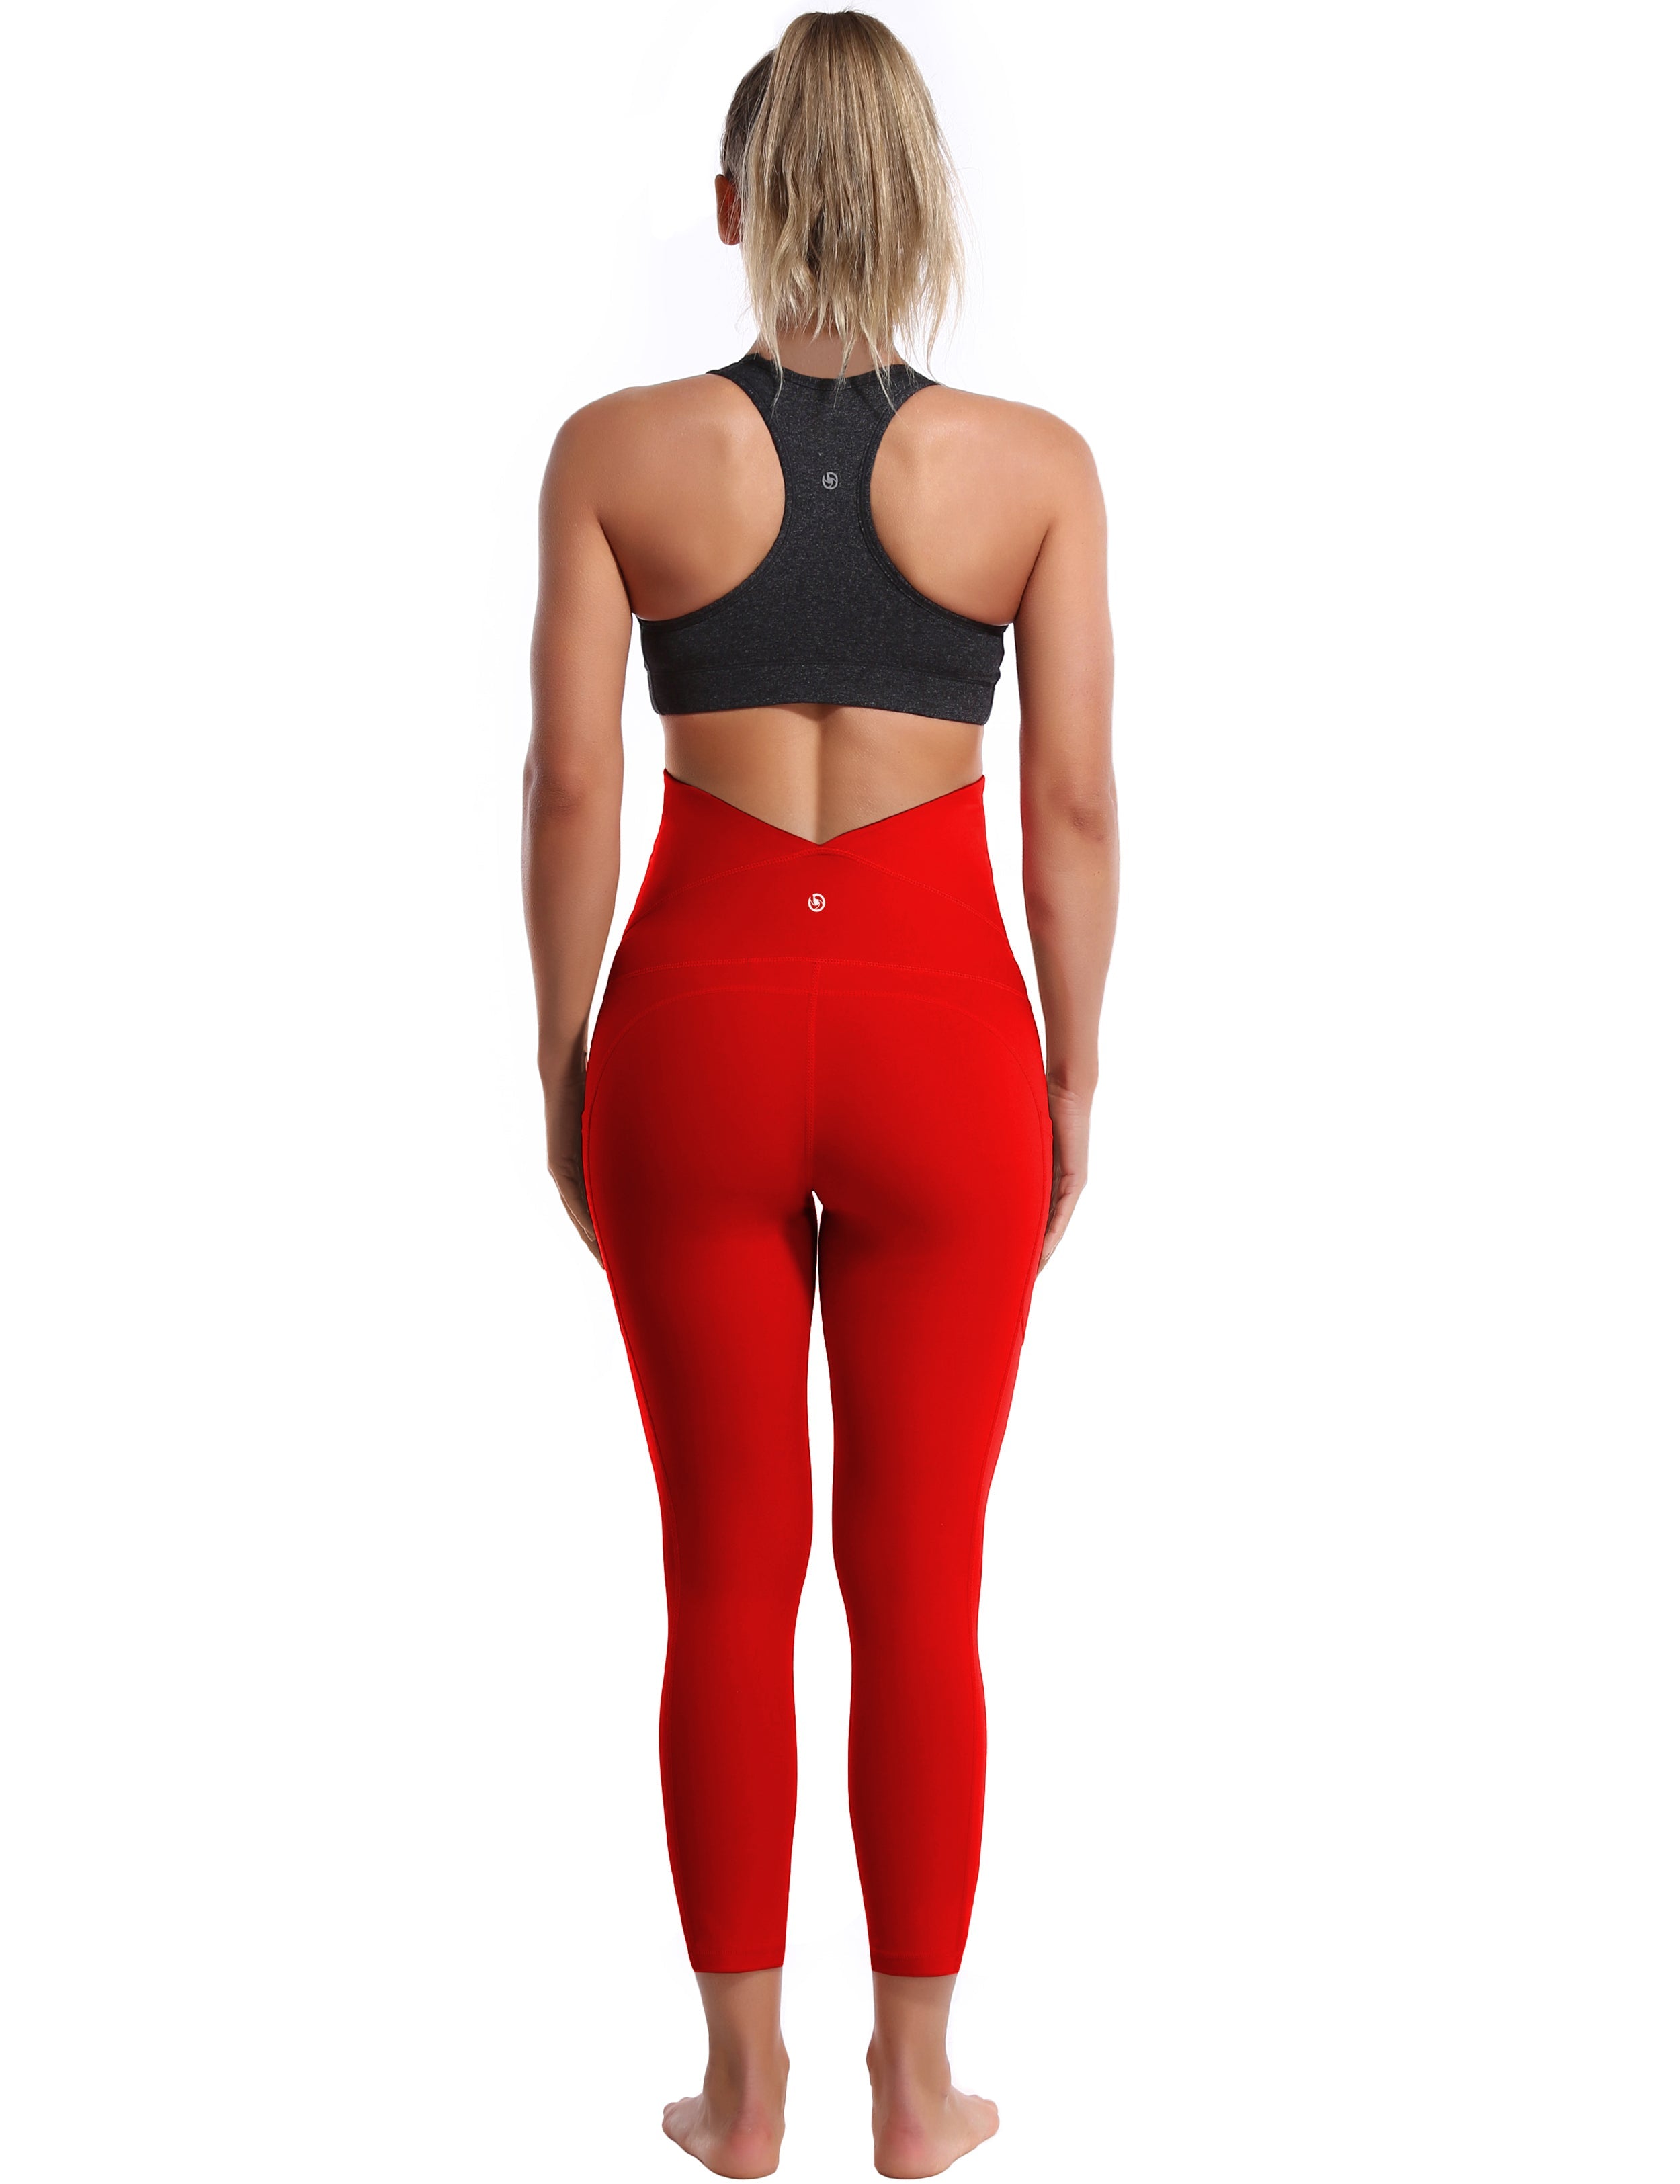 22" Side Pockets Maternity Gym Pants scarlet 87%Nylon/13%Spandex Softest-ever fabric High elasticity 4-way stretch Fabric doesn't attract lint easily No see-through Moisture-wicking Machine wash